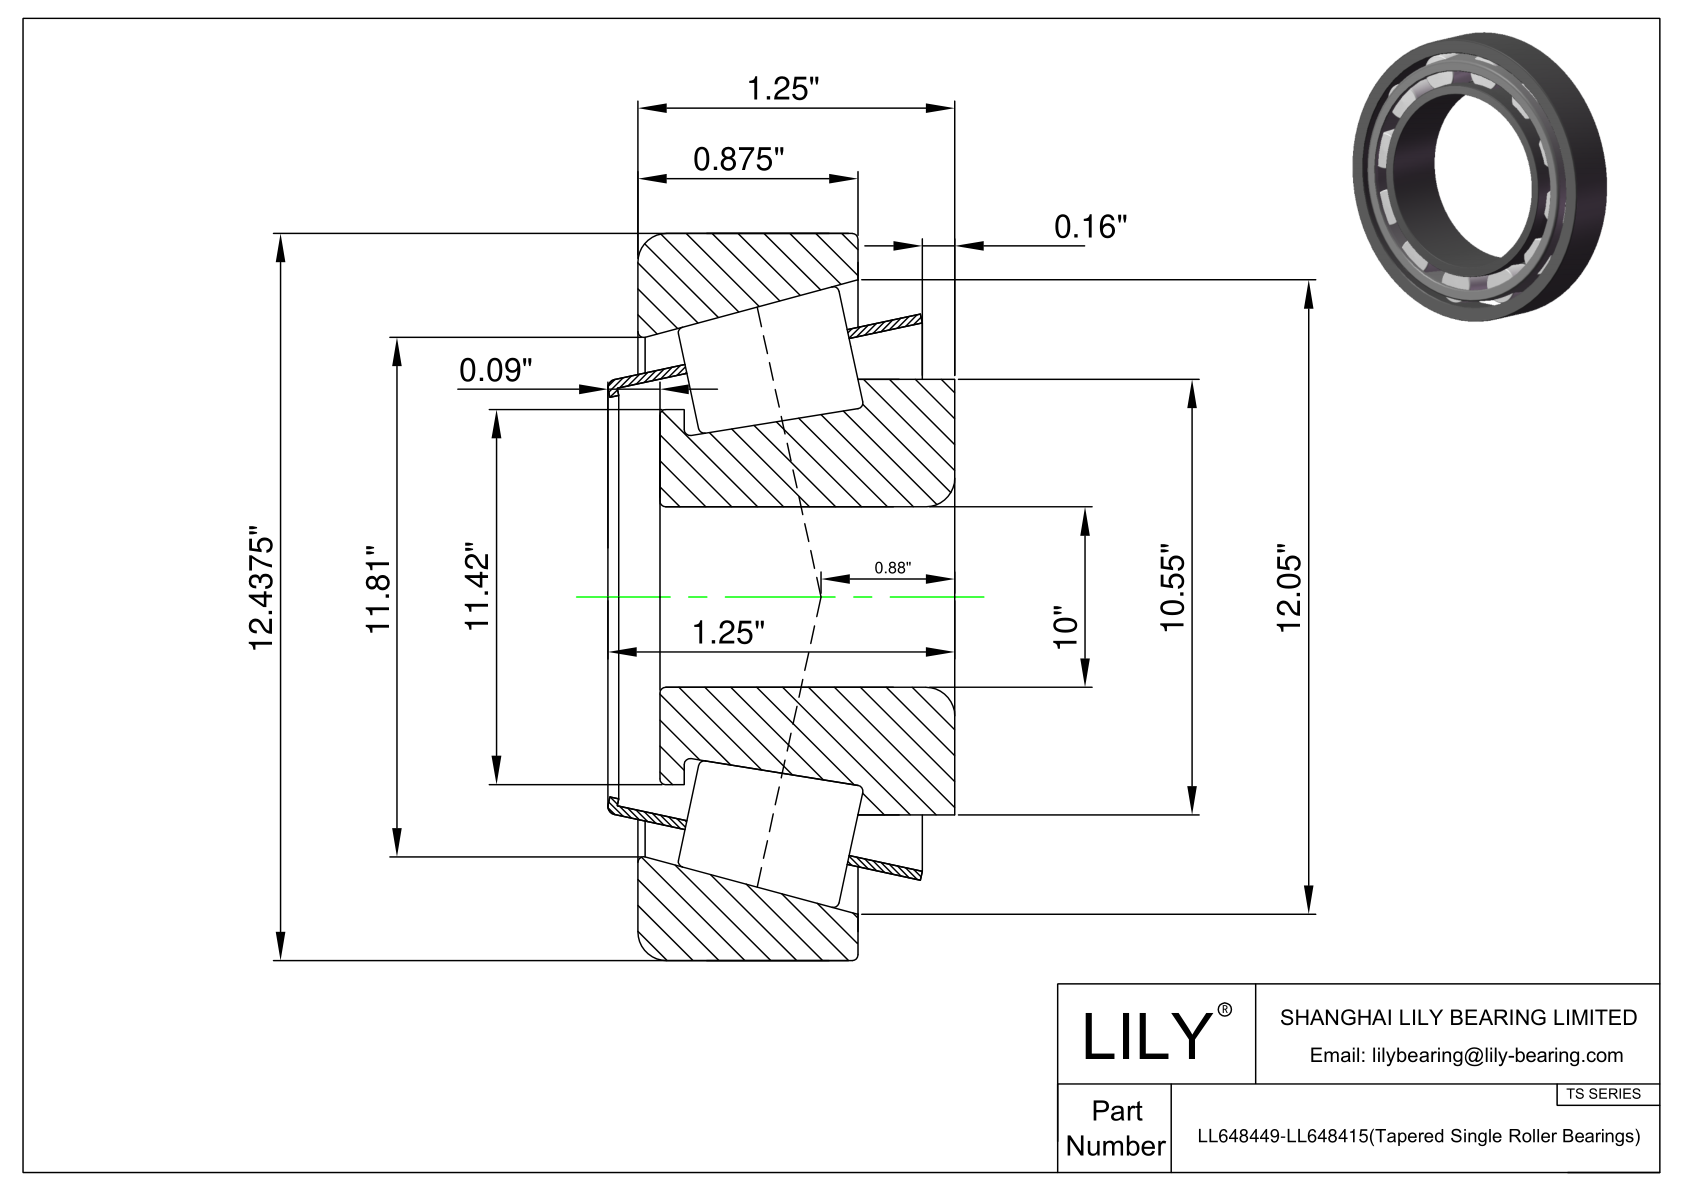 LL648449-LL648415 TS (Tapered Single Roller Bearings) (Imperial) cad drawing